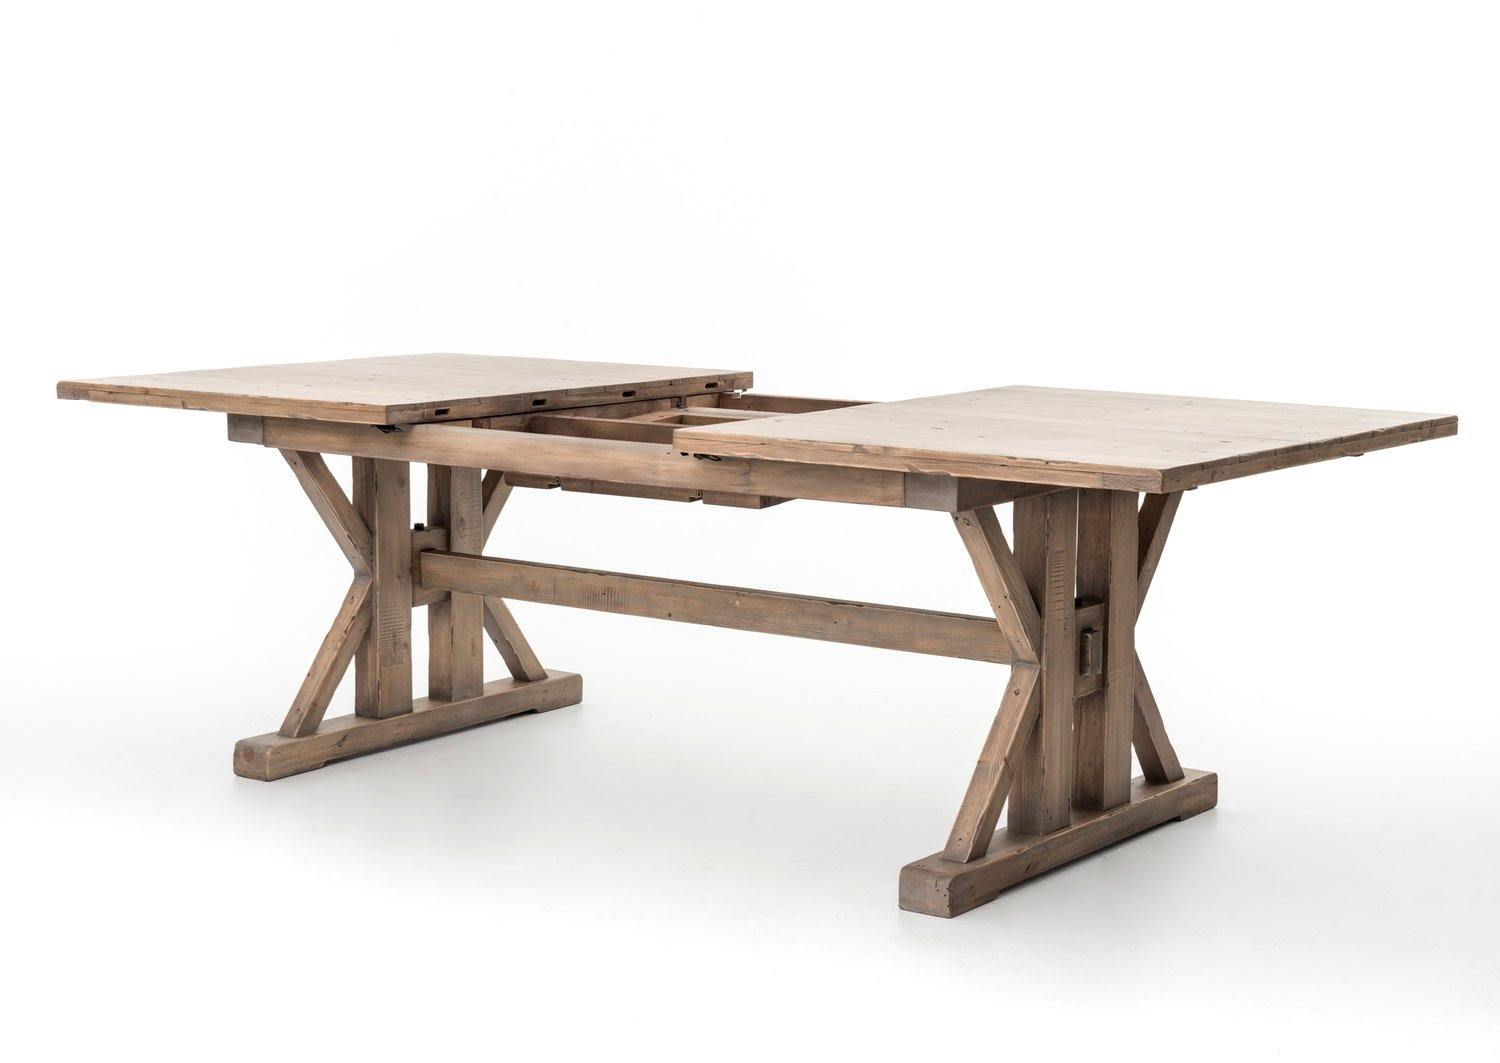 Tuscanspring Farmhouse Dining Table - Reimagine Designs - 